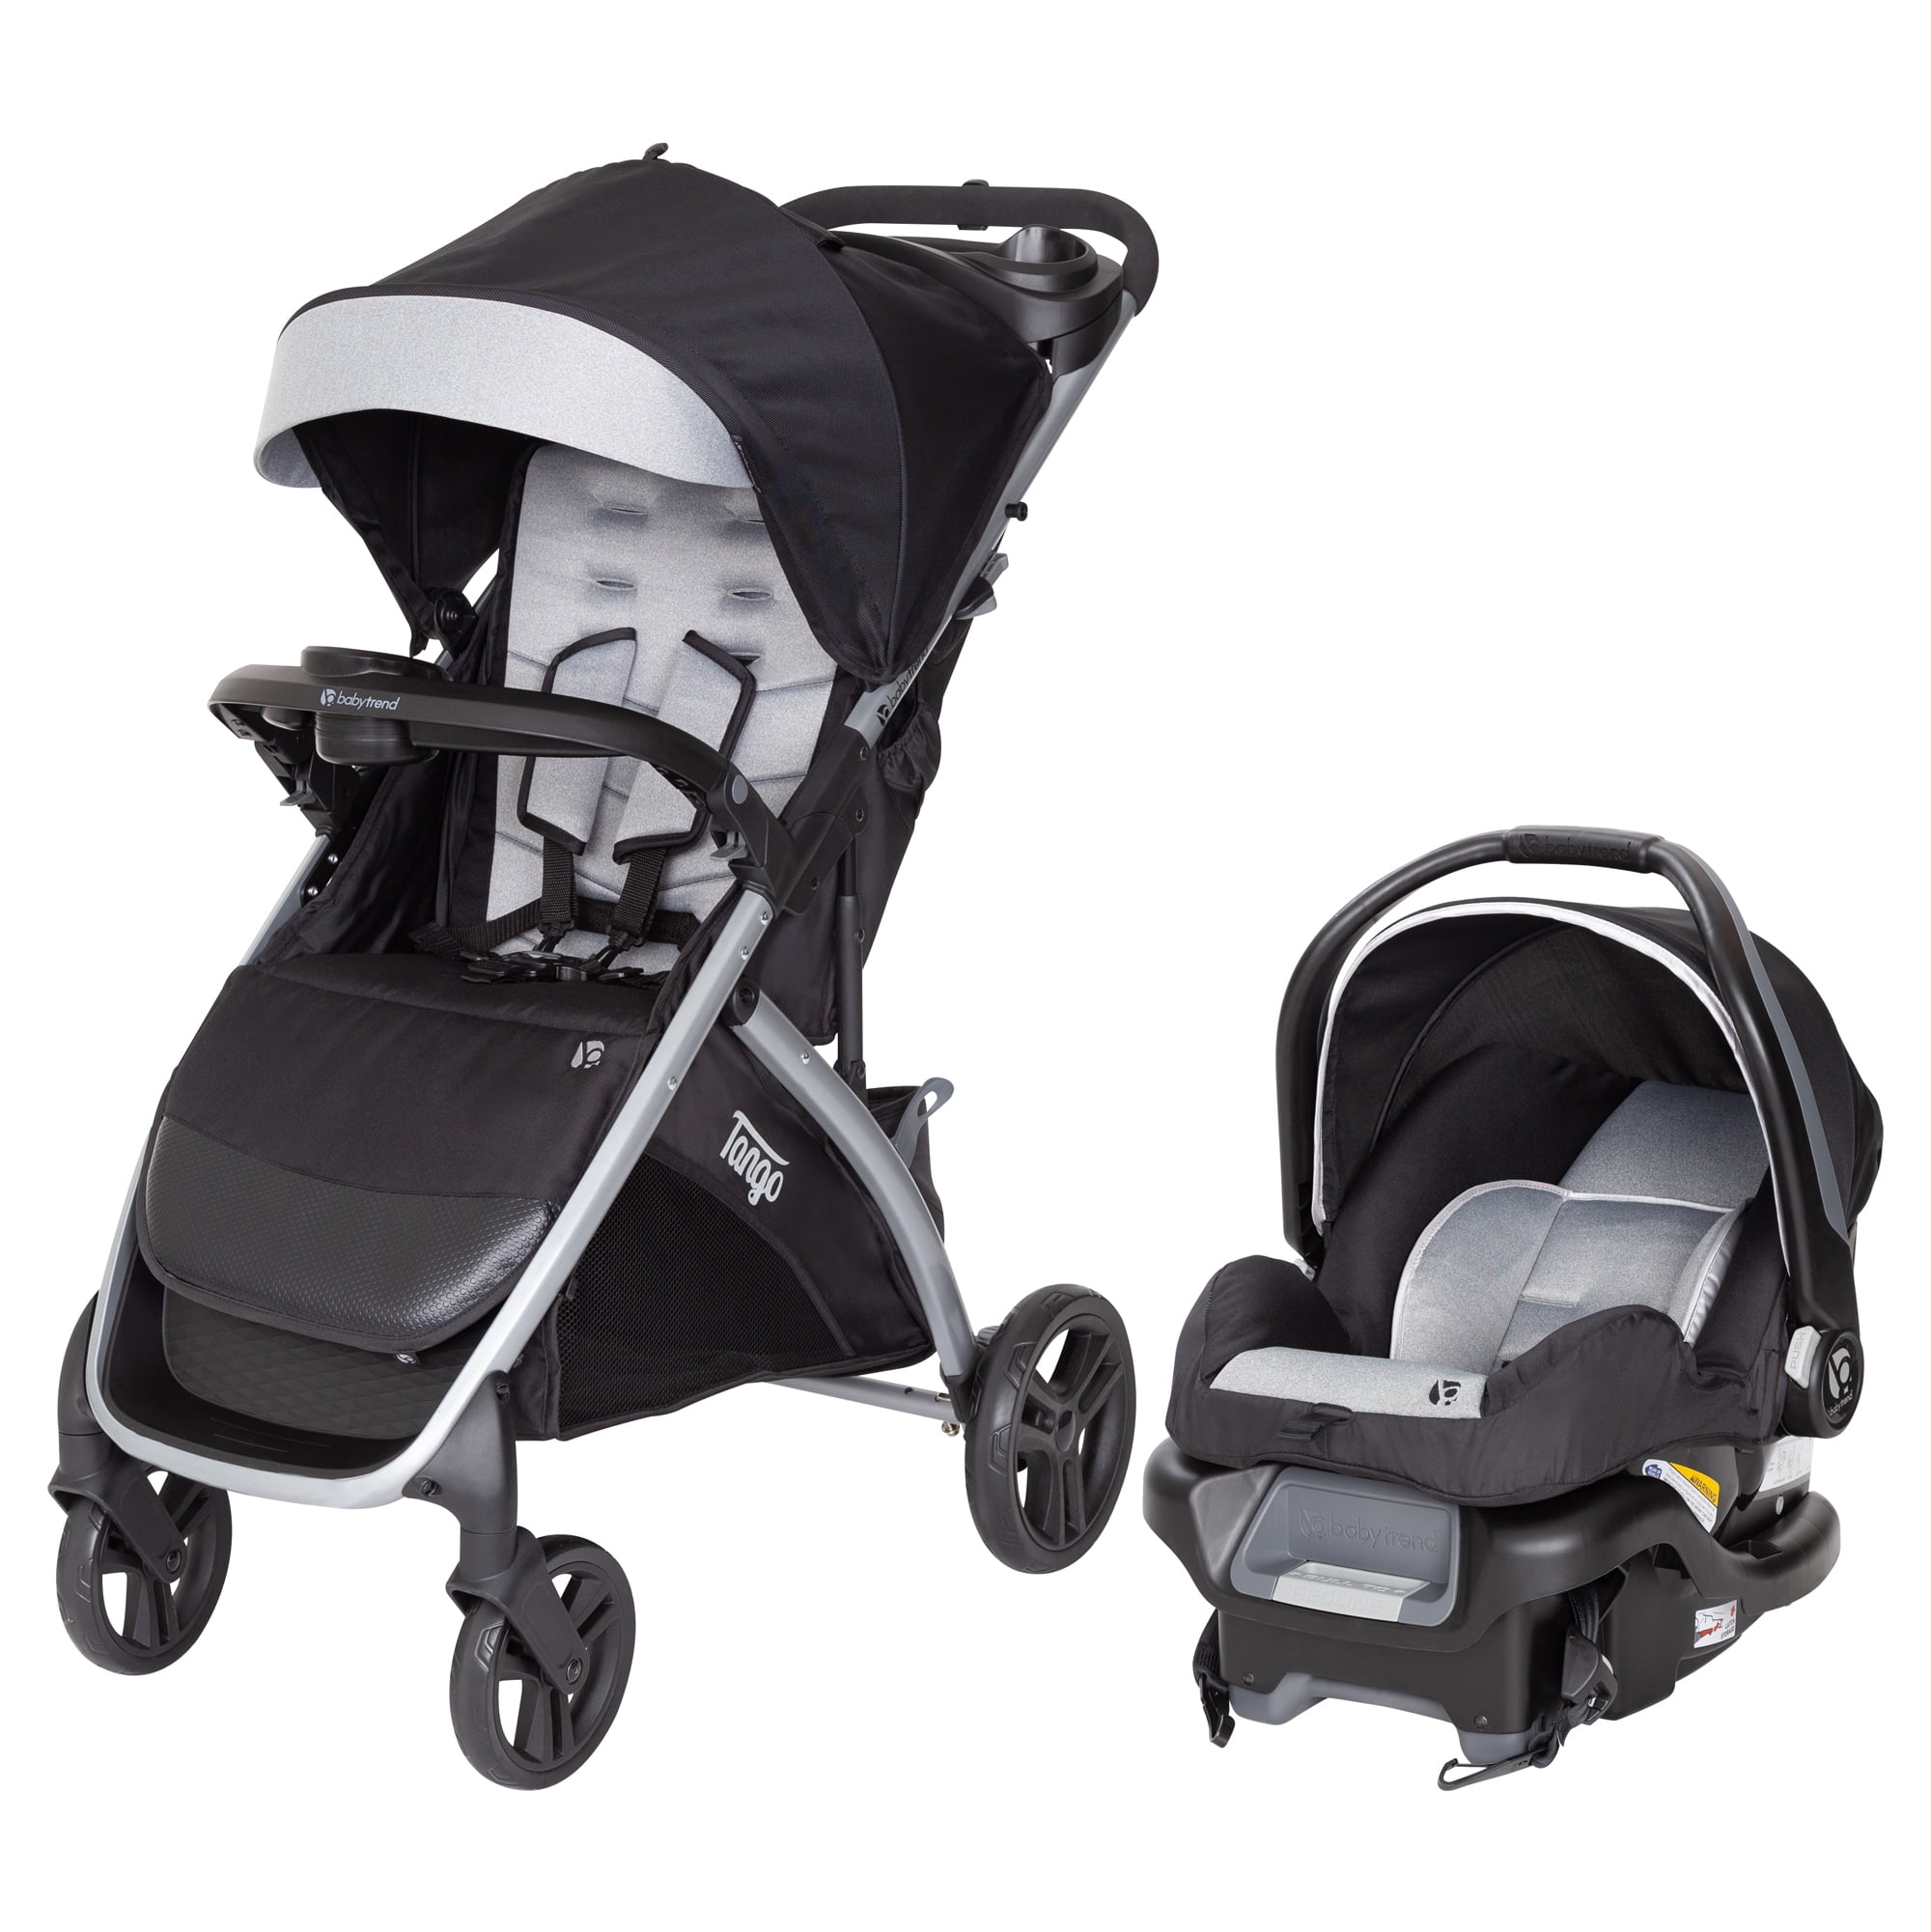 baby trend city clicker travel system